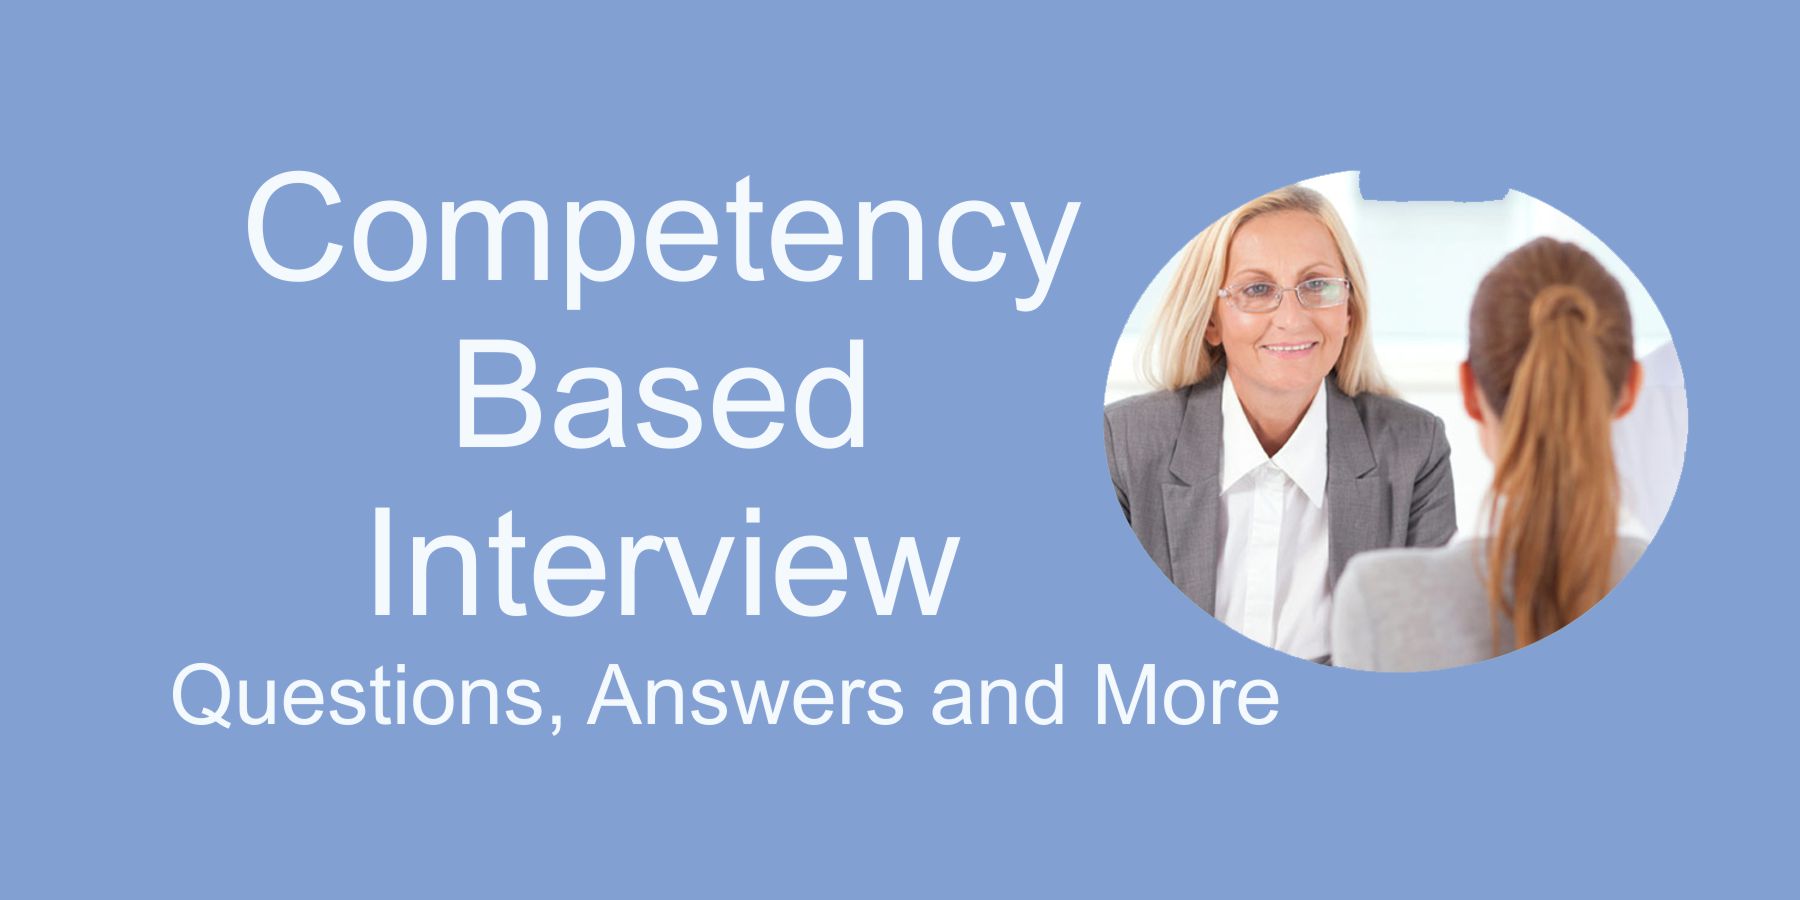 Competency based interview questions and answers for leadership, communicating, delivering at pace, decision making, managing a quality service and more